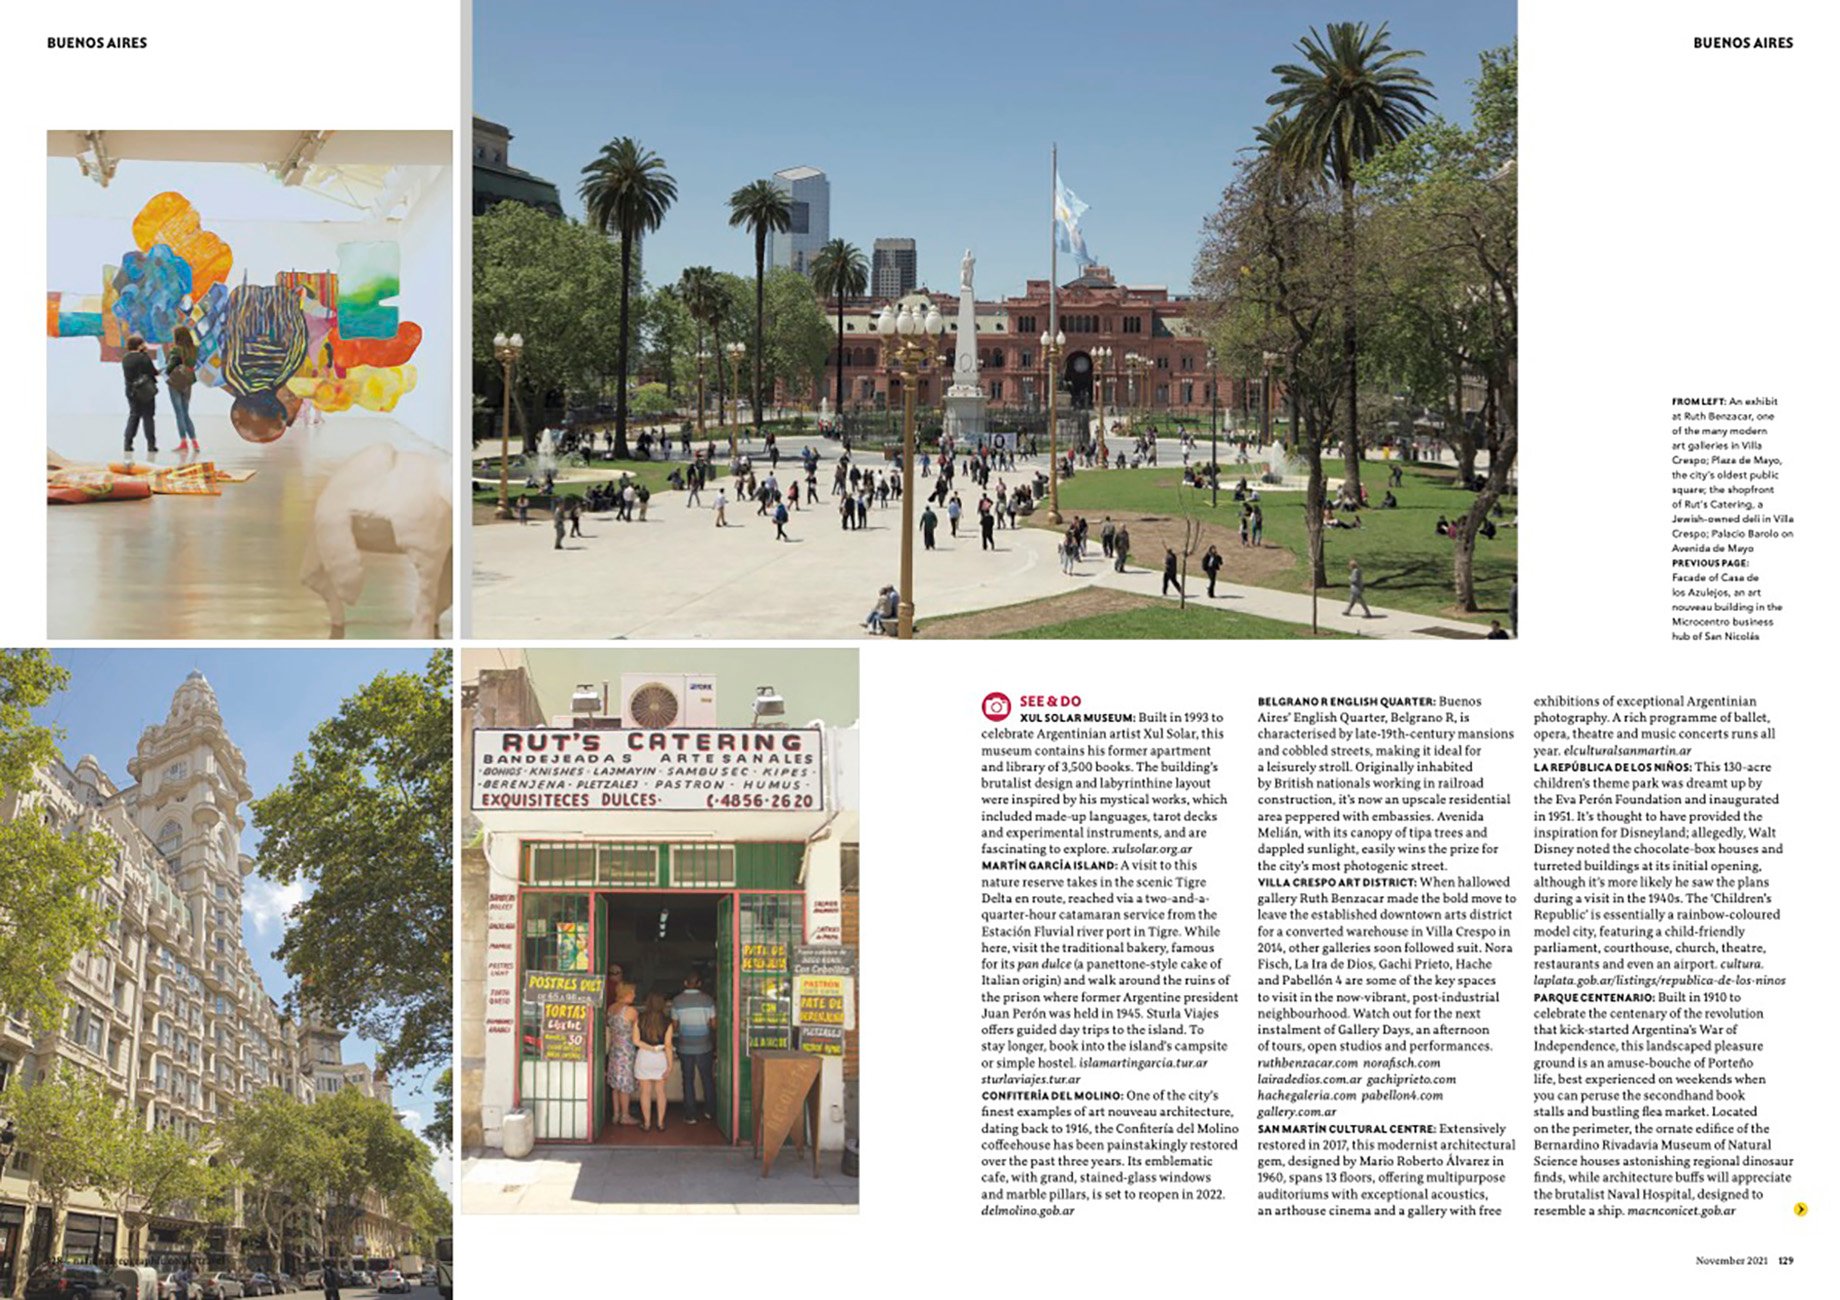 Tearsheet of Buenos Aires shot by Javier Pierini for National Geographic UK 